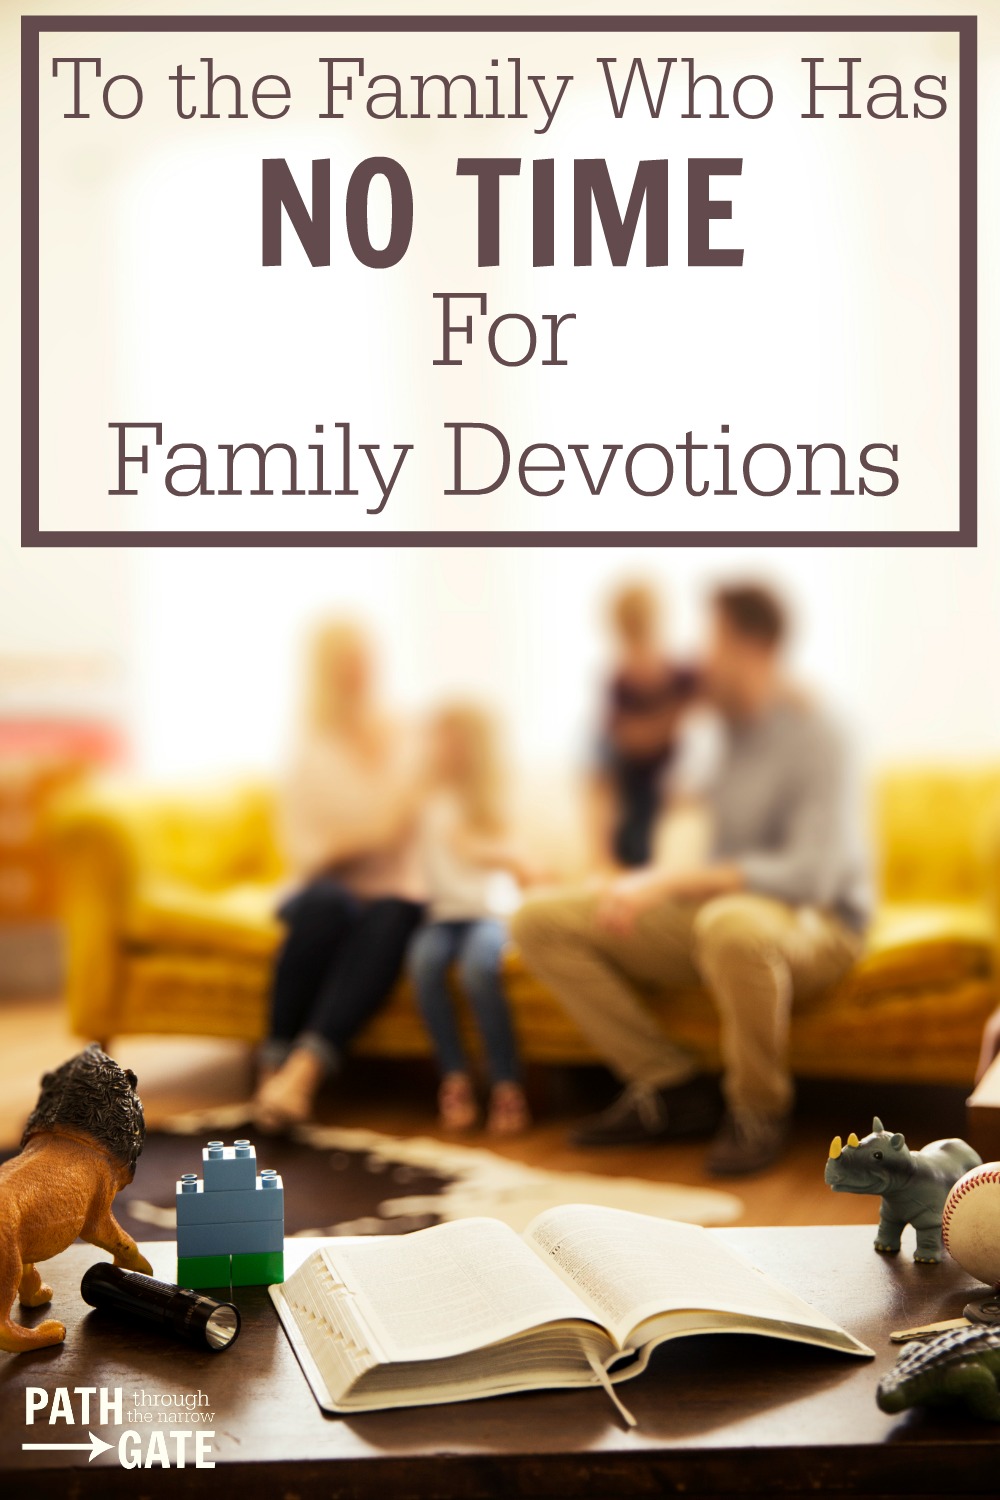 Do you feel like you have no time for family devotions? Family devotions doesn't have to take a lot of time, especially when you follow these 5 easy steps.| Path Through the Narrow Gate.com